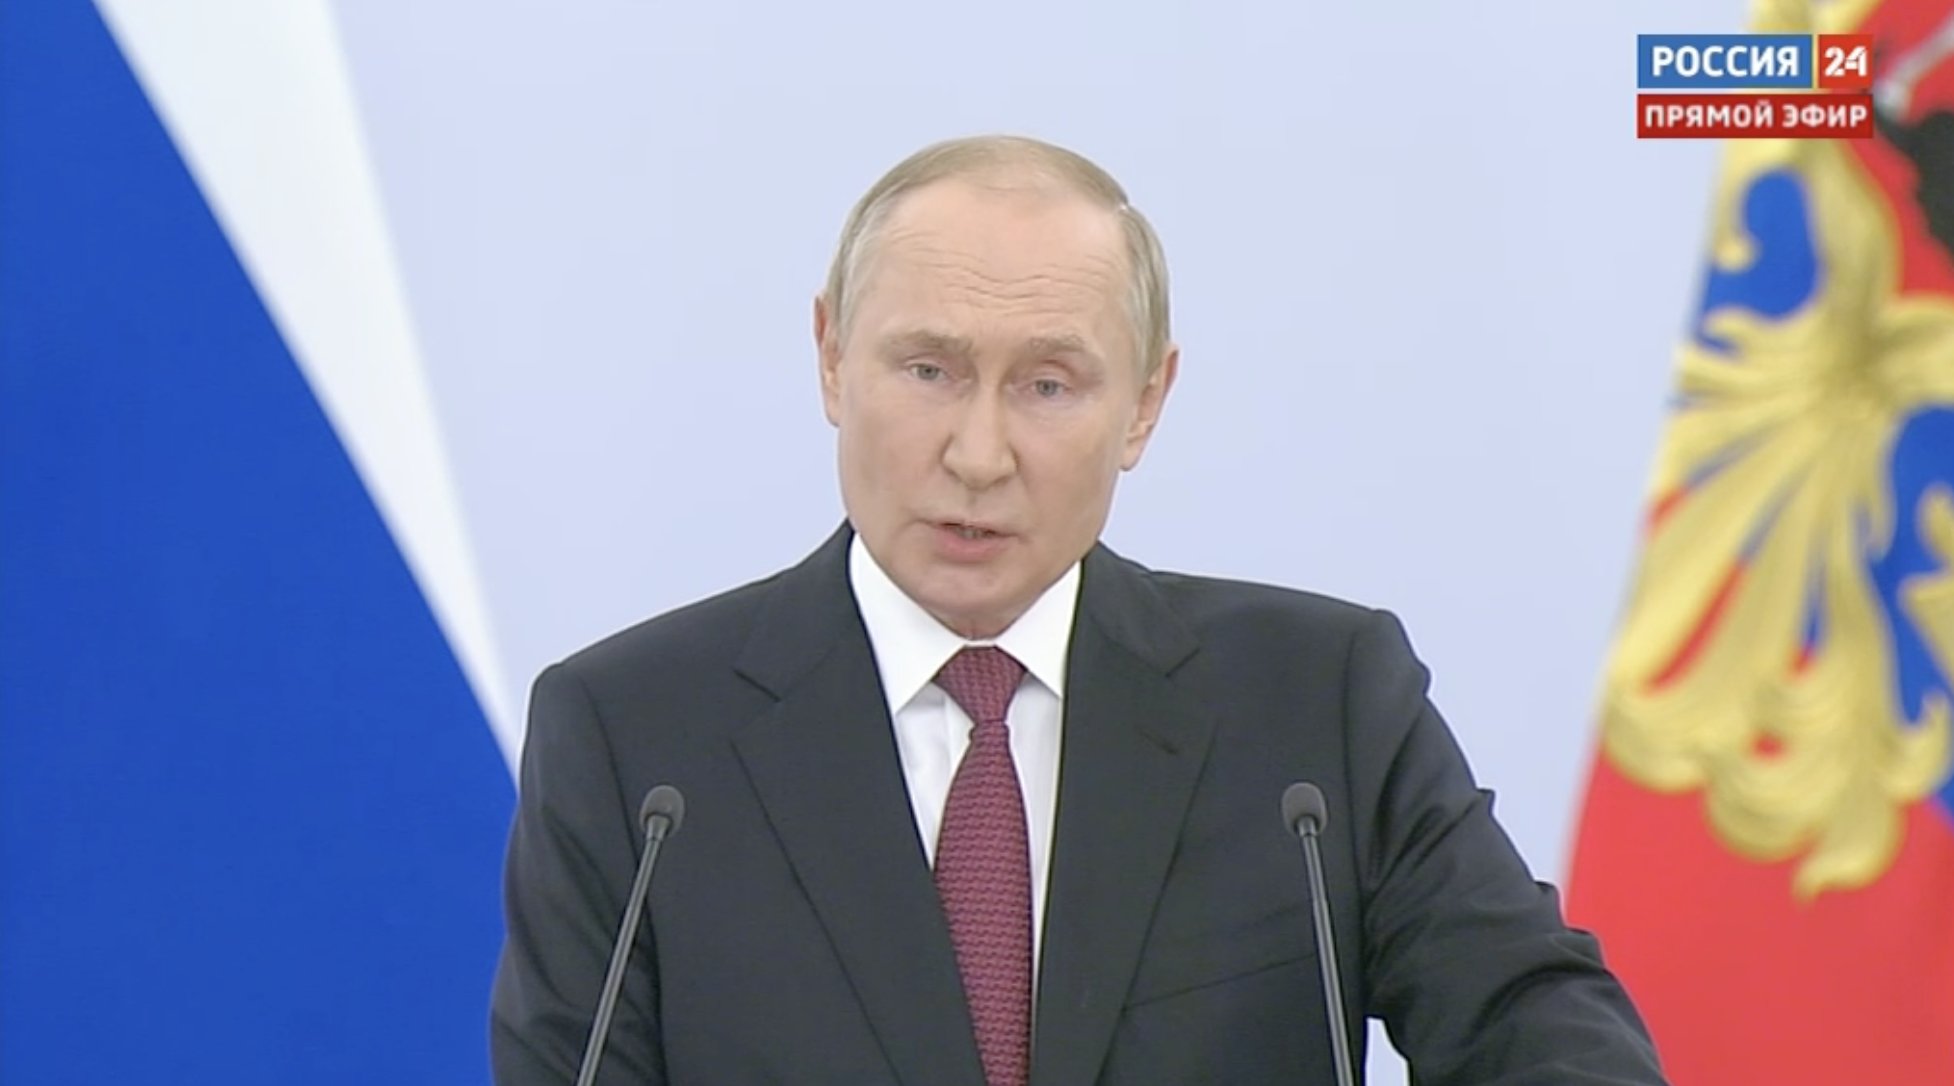 Putin Accuses West of ‘Satanism’ and Announces Annexations in Terrifying Speech